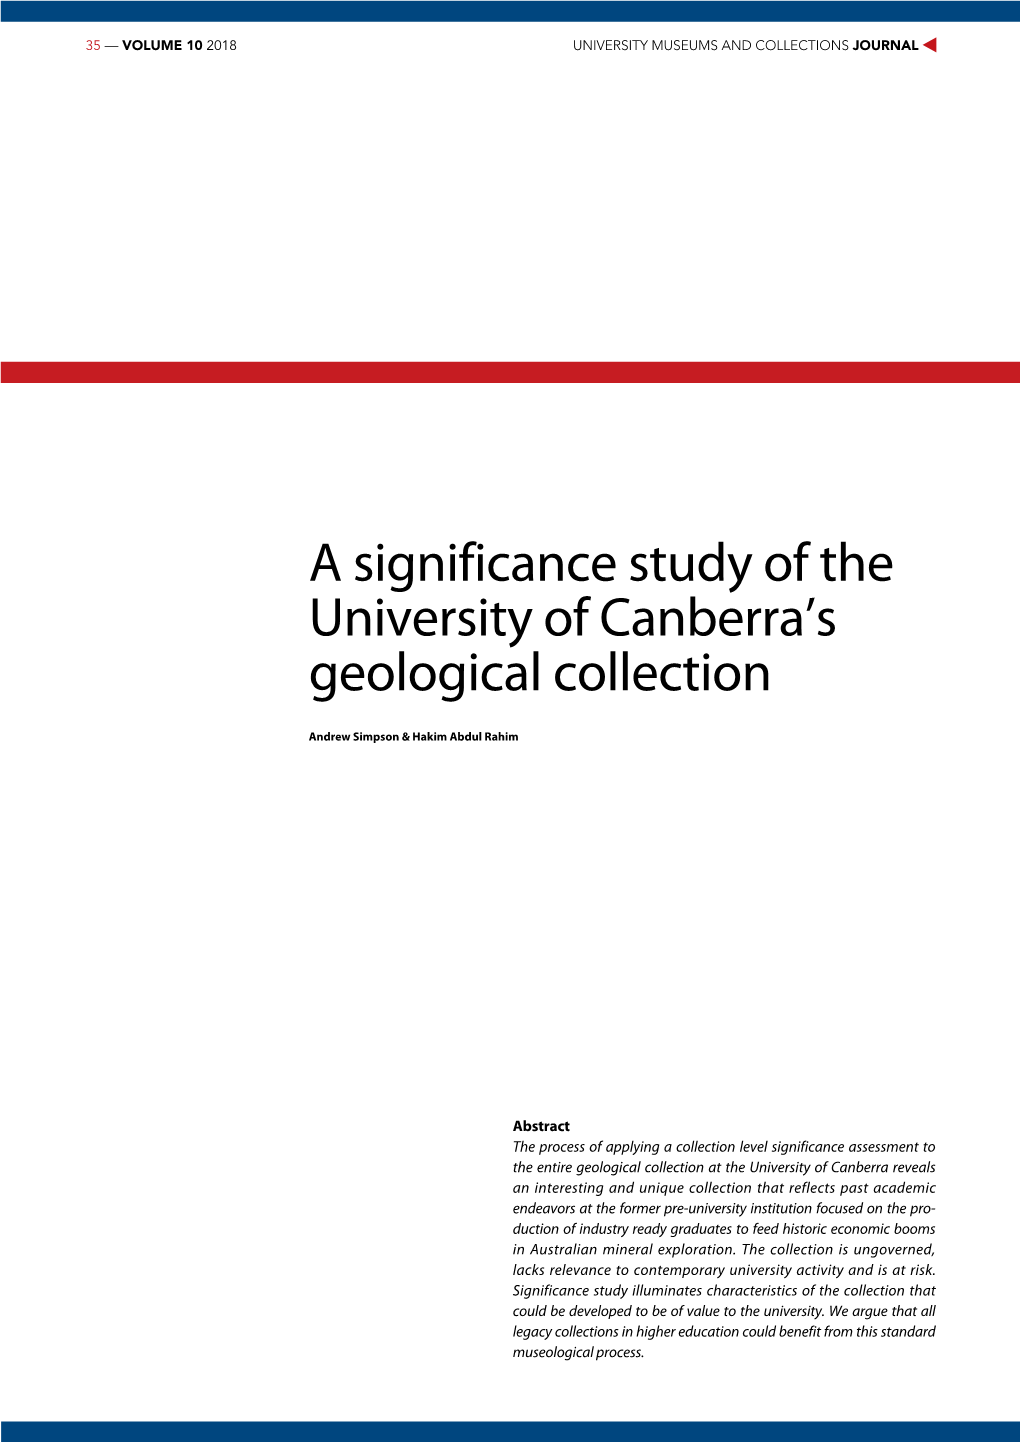 A Significance Study of the University of Canberra's Geological Collection